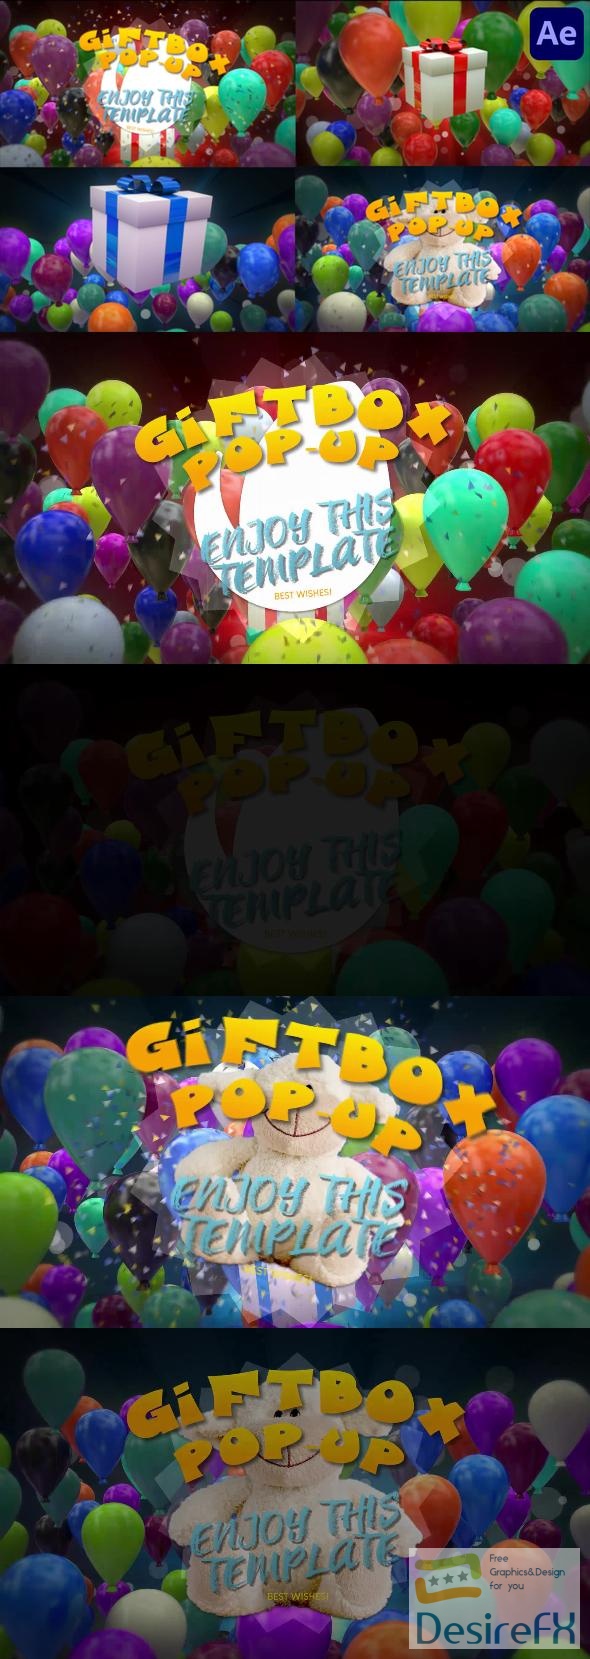 VideoHive Gift Box Pop Up for After Effects 43751731